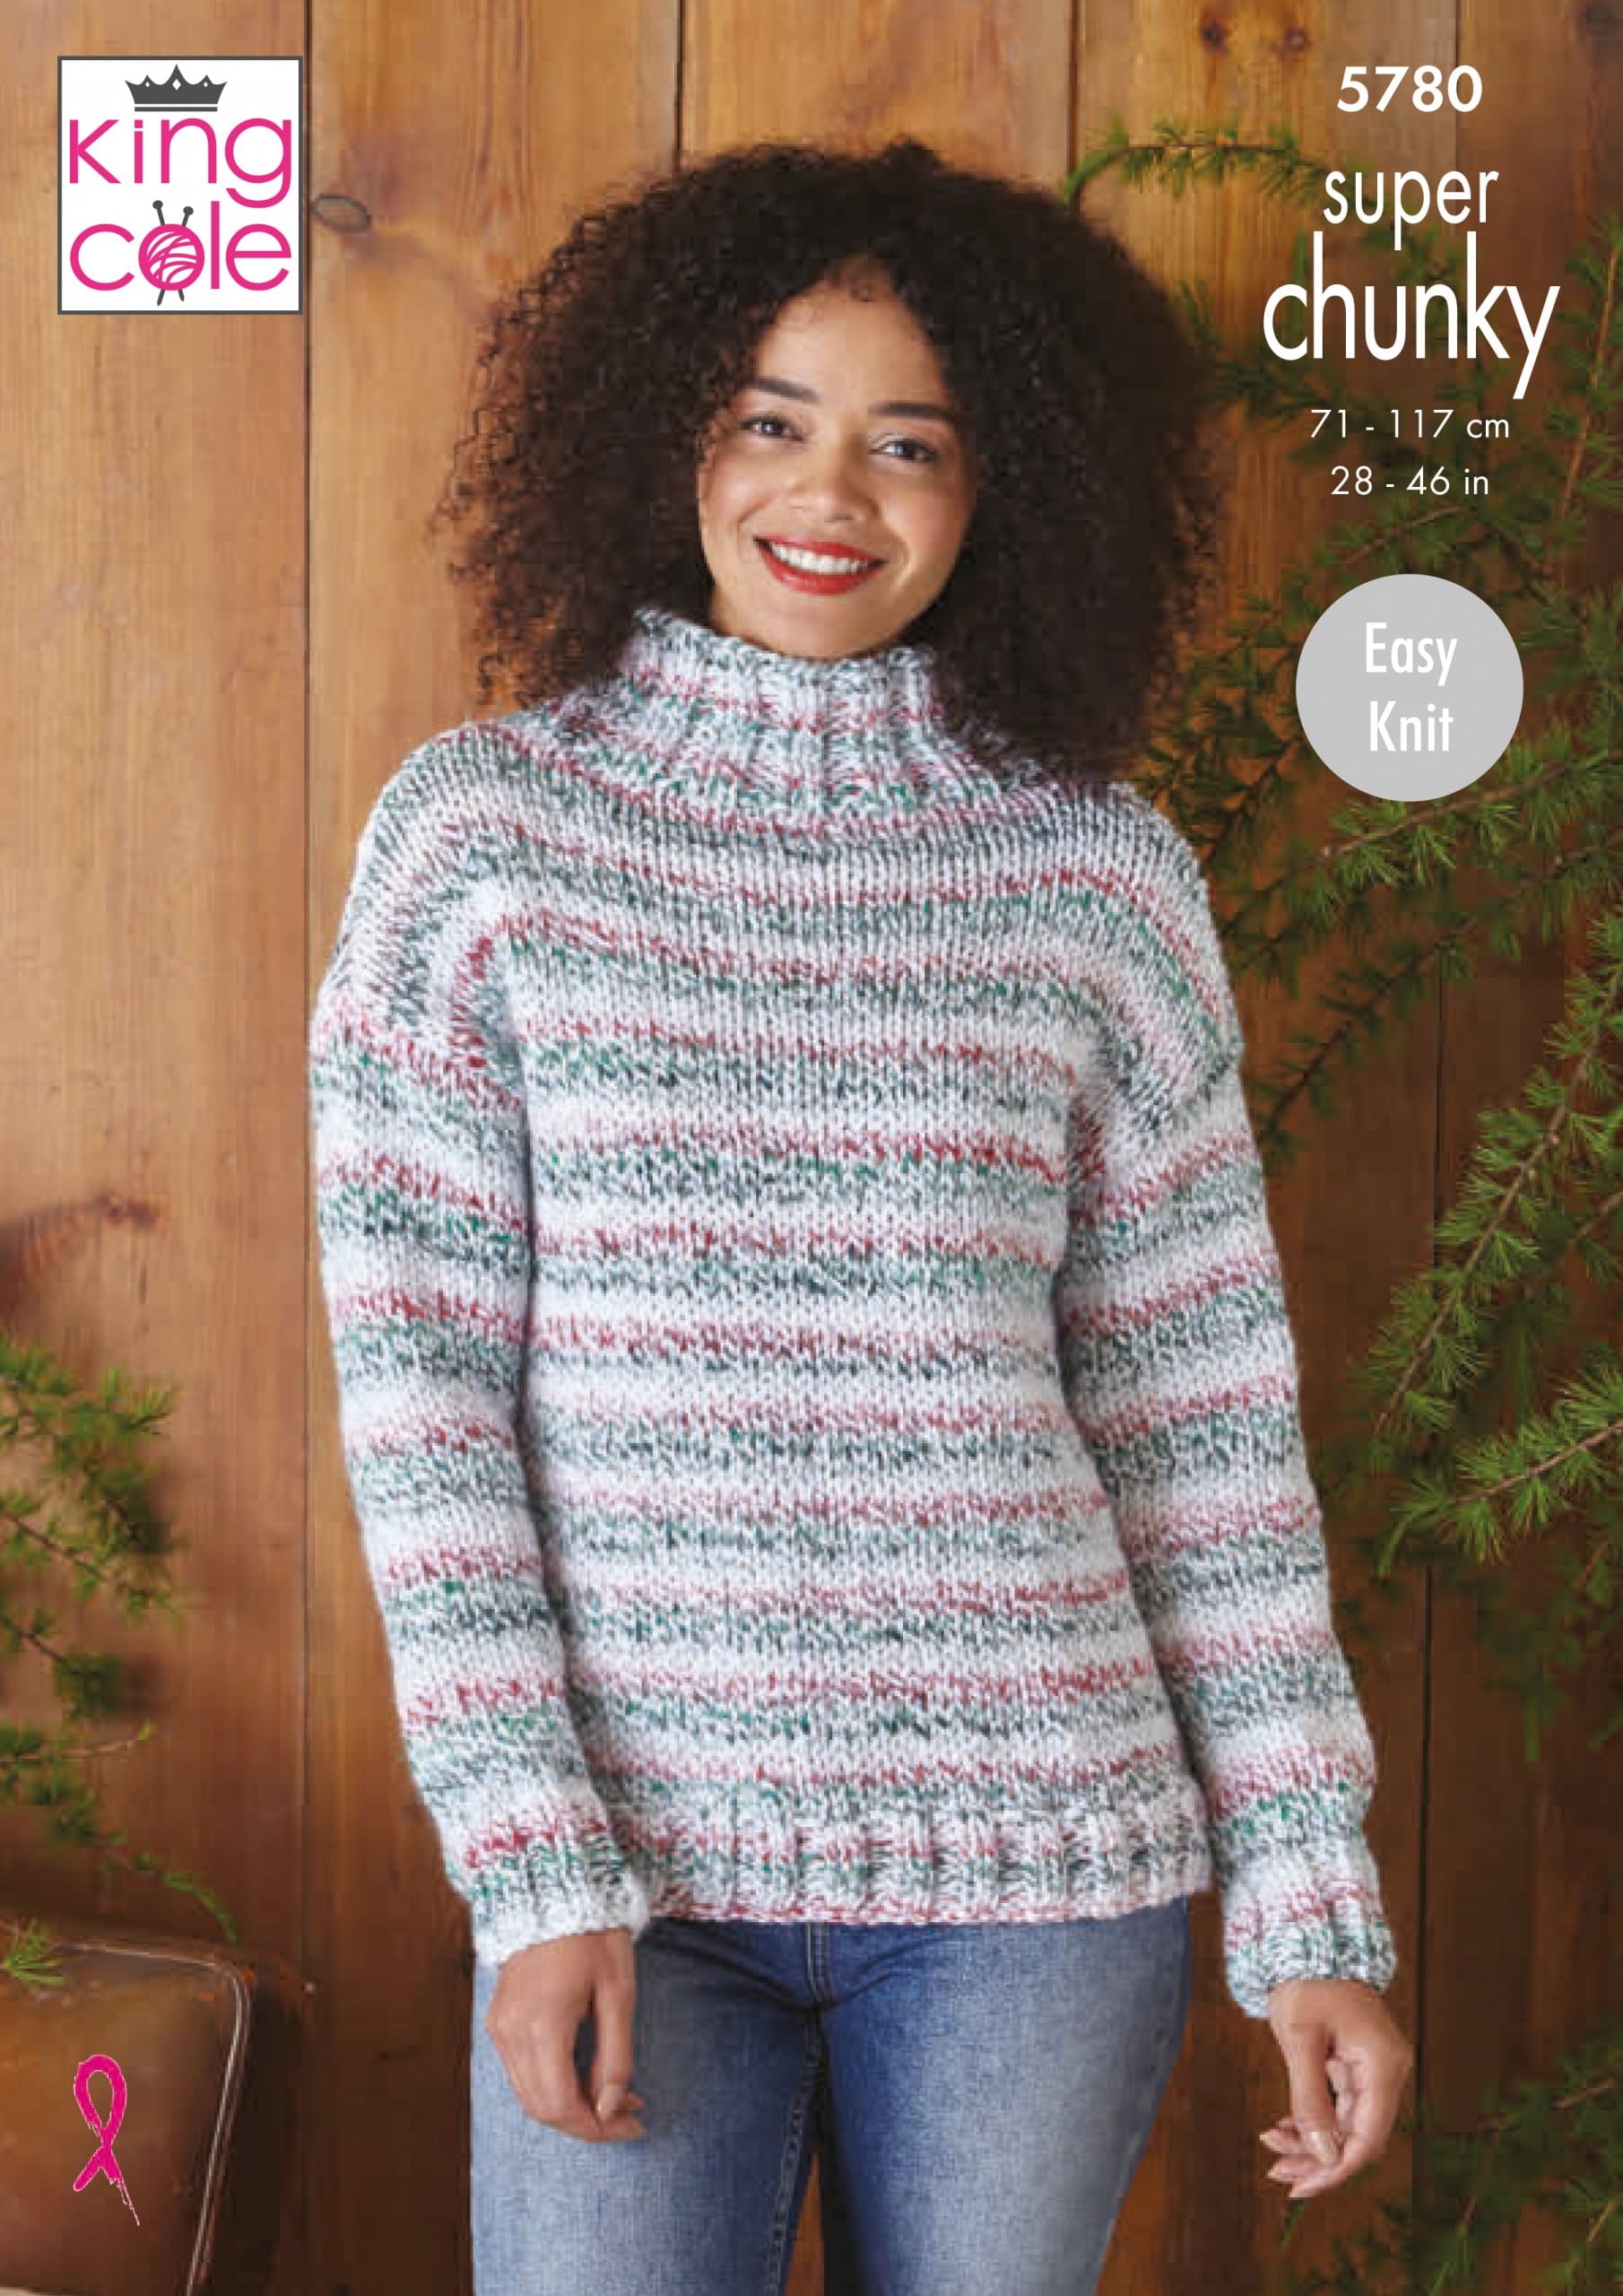 Easy to Follow Cardigan & Sweater Knitted in Christmas Super Chunky